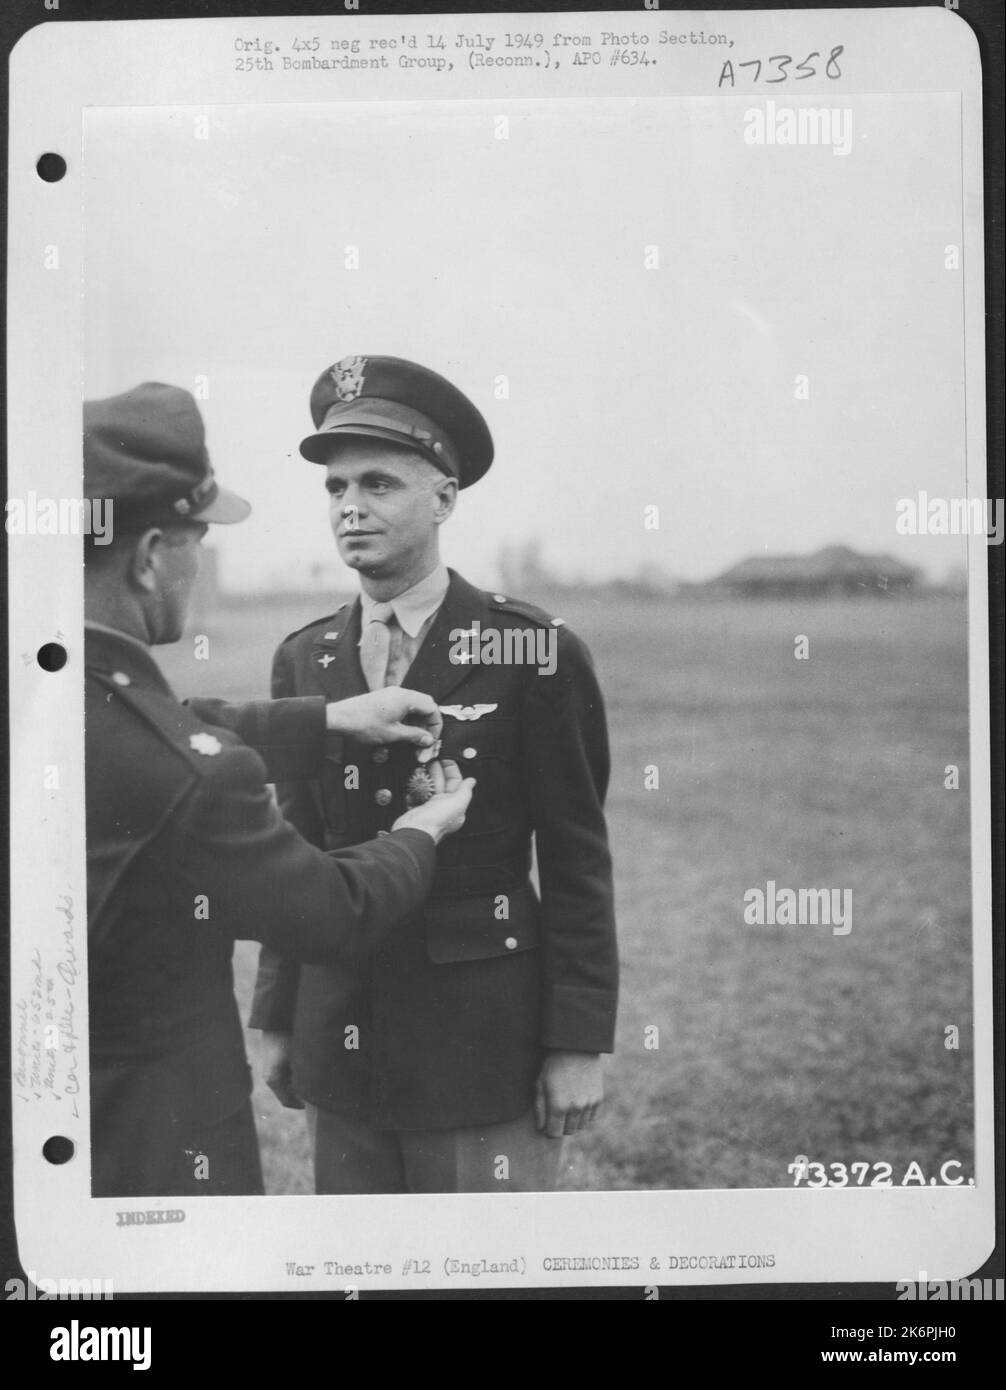 Lt. E.H. Ownbey Of The 652Nd Weather Reconnaissance Squadron, 25Th Weather Reconnaissance Group, Is Presented The Air Medal At An 8Th Air Force Base In England. 10 June 1944. Stock Photo